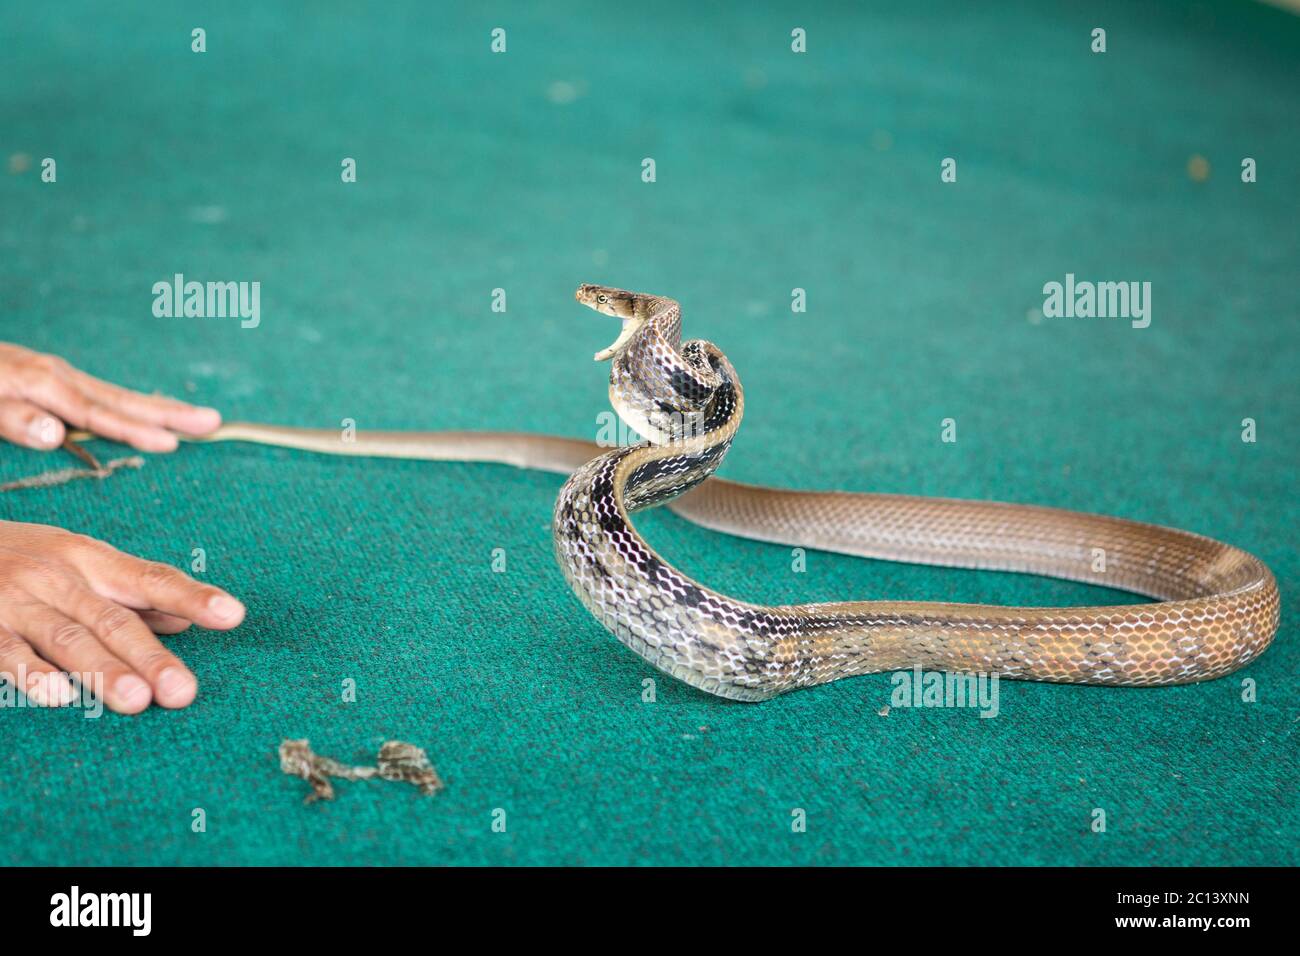 Pattaya, Thailand - January 2017: show snakes by playing with a snake during the Stock Photo